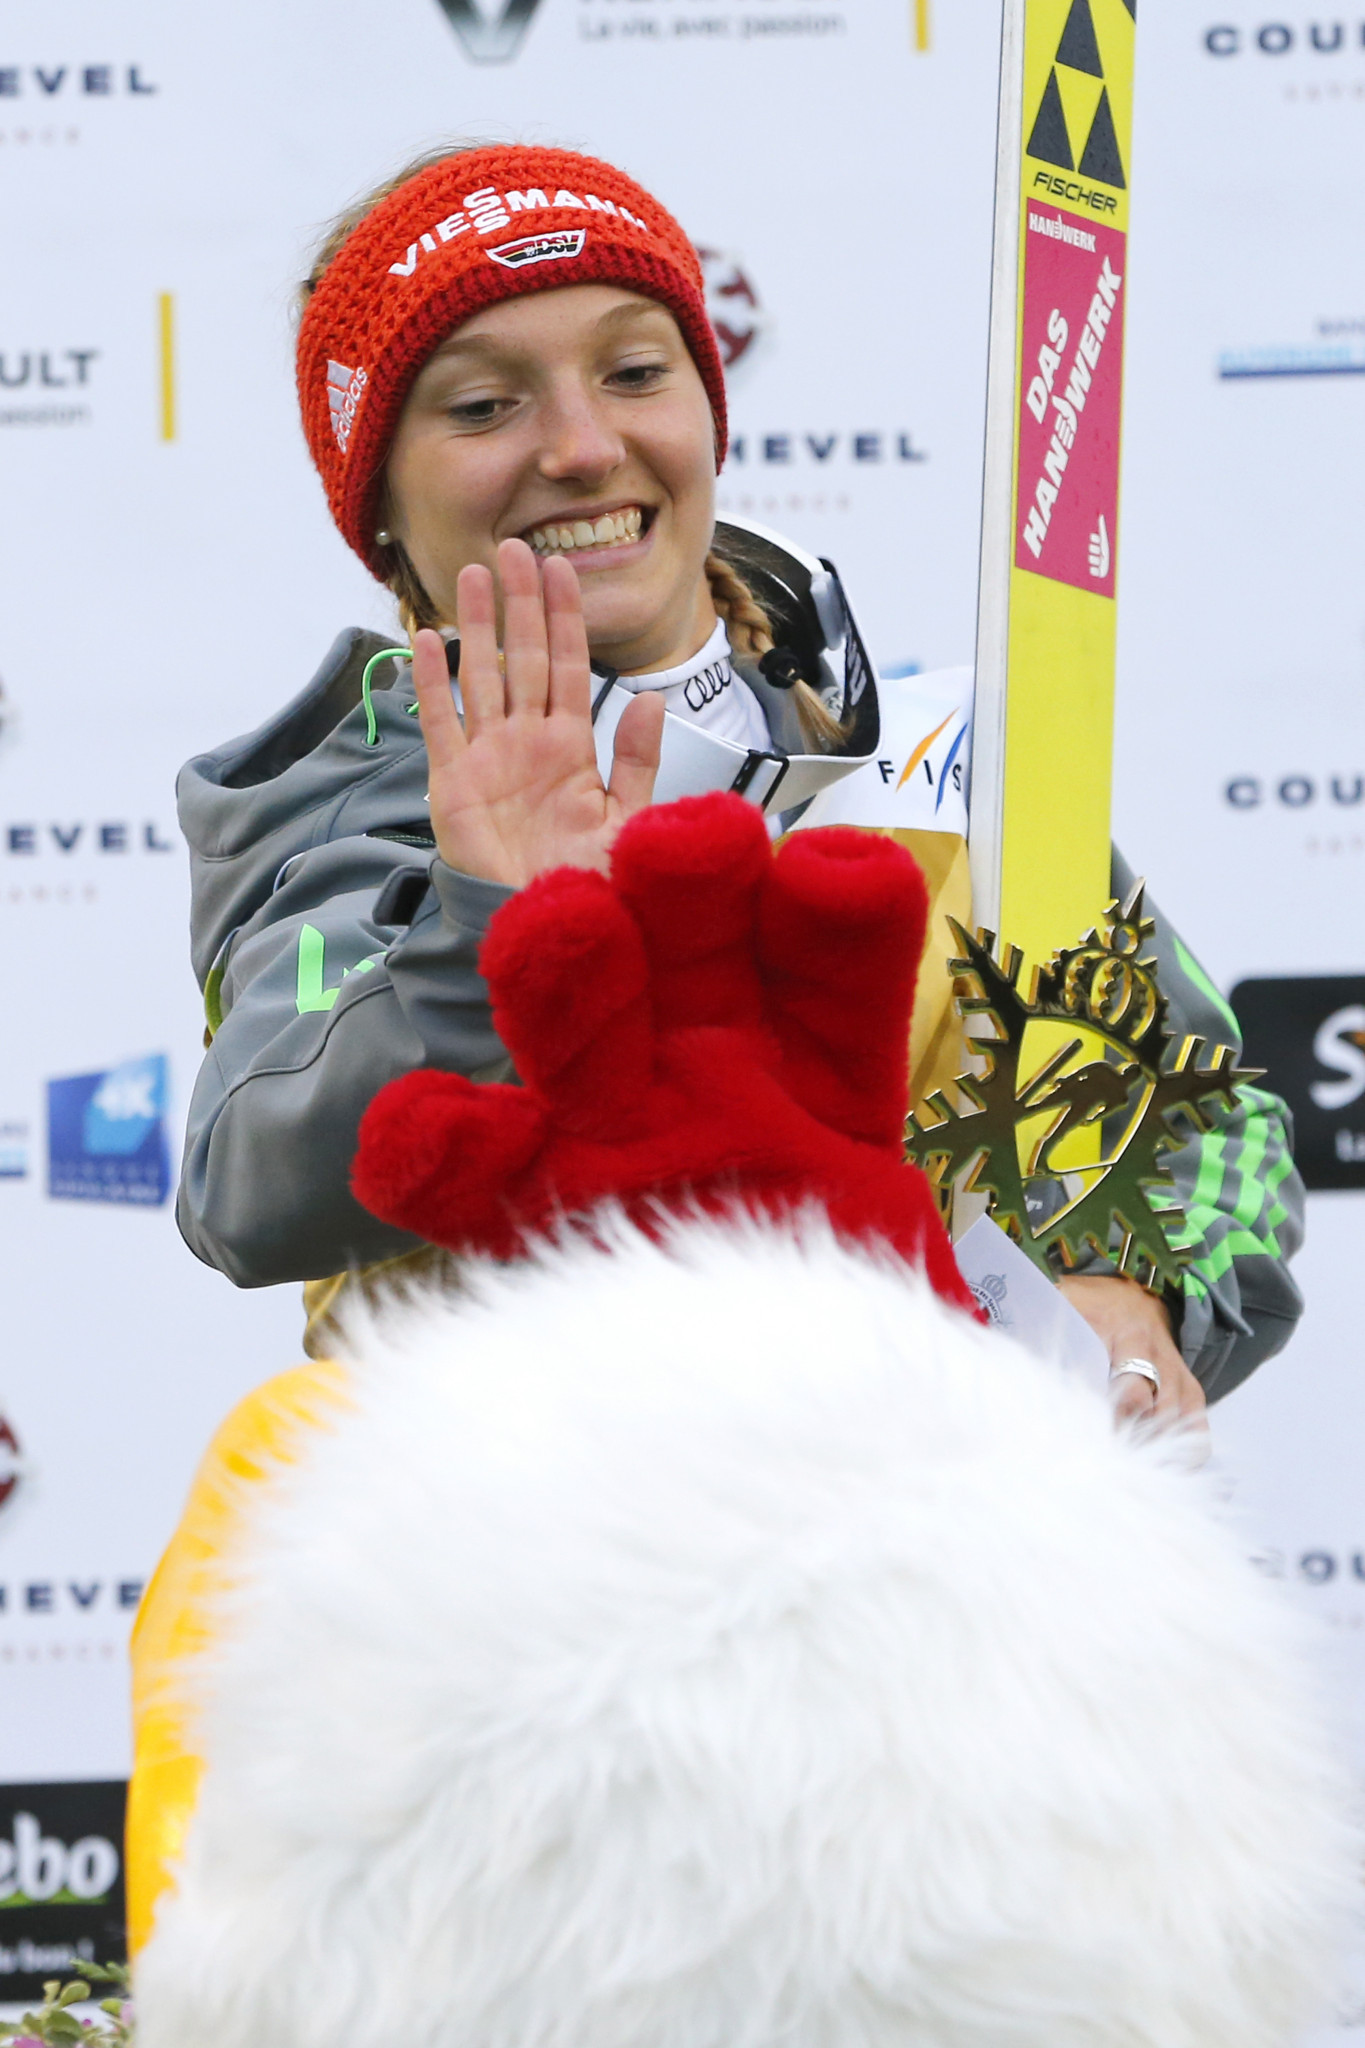 Germany's Katharina Althaus earned a second win at the FIS Ski-Jumping World Cup at Premanon in France ©Getty Images